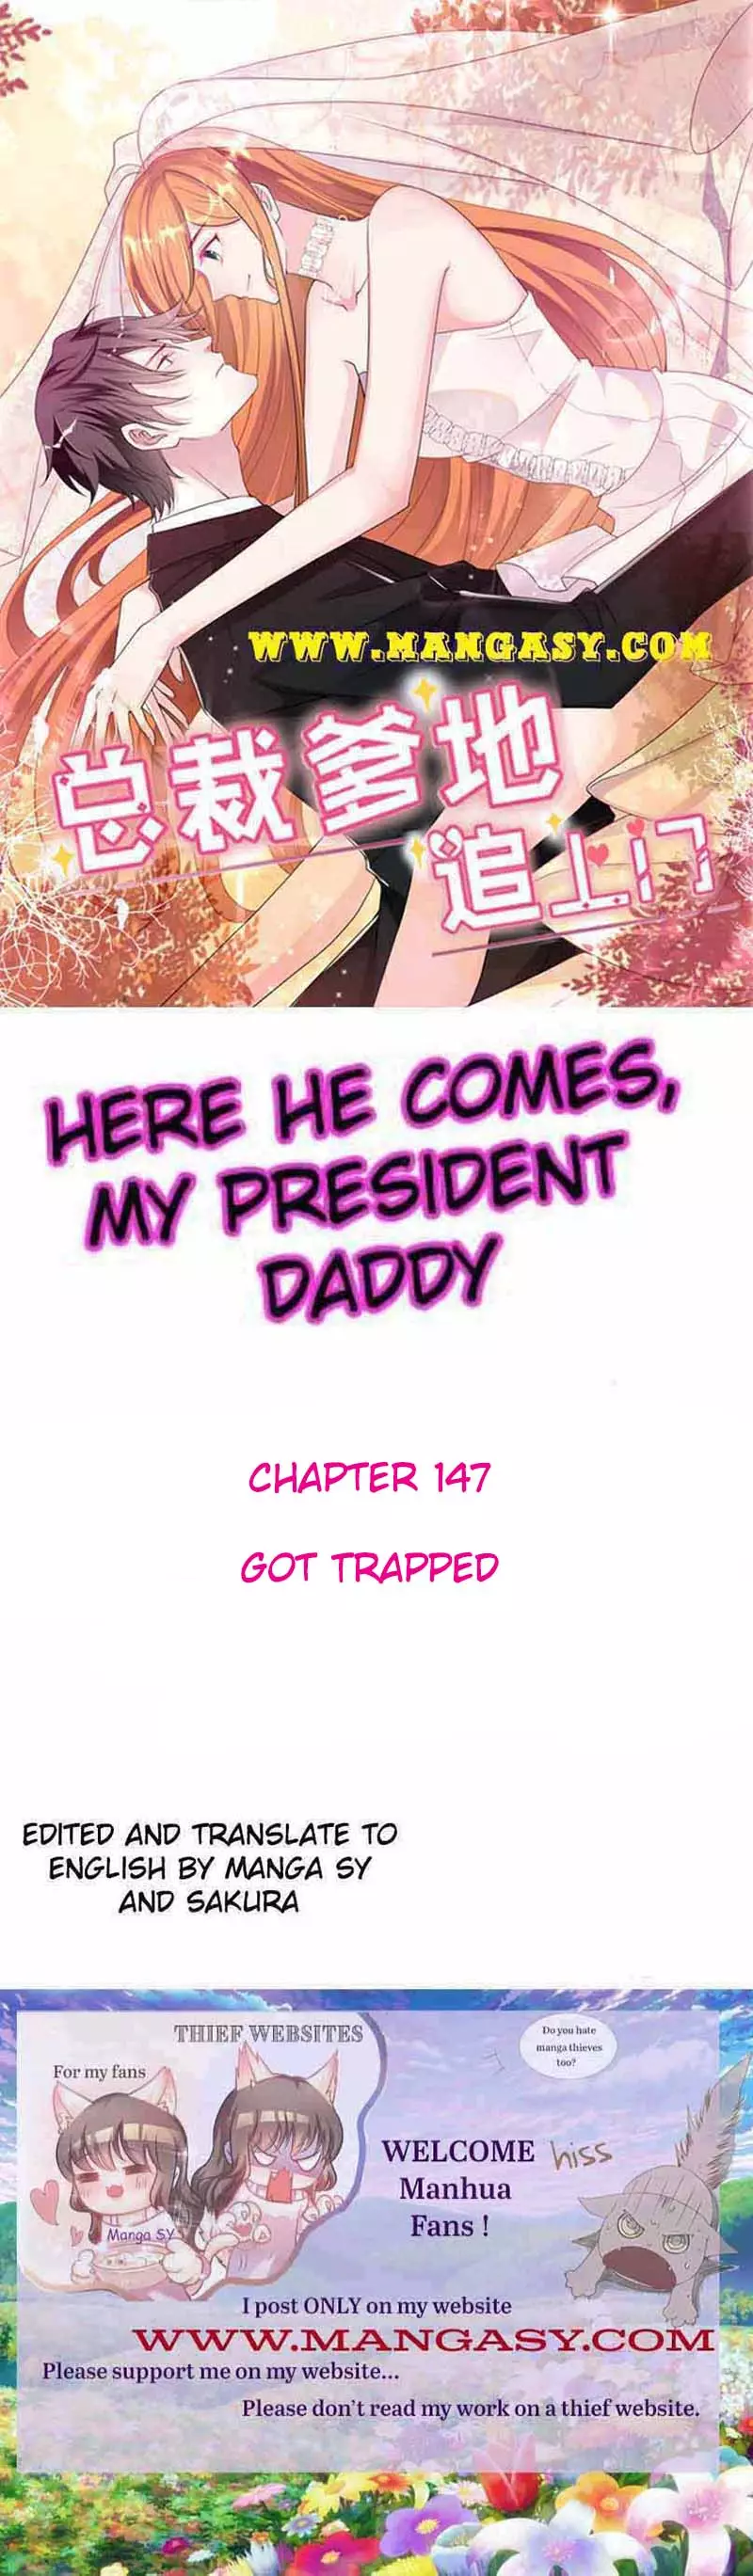 President Daddy Is Chasing You - 147 page 1-107f8df1